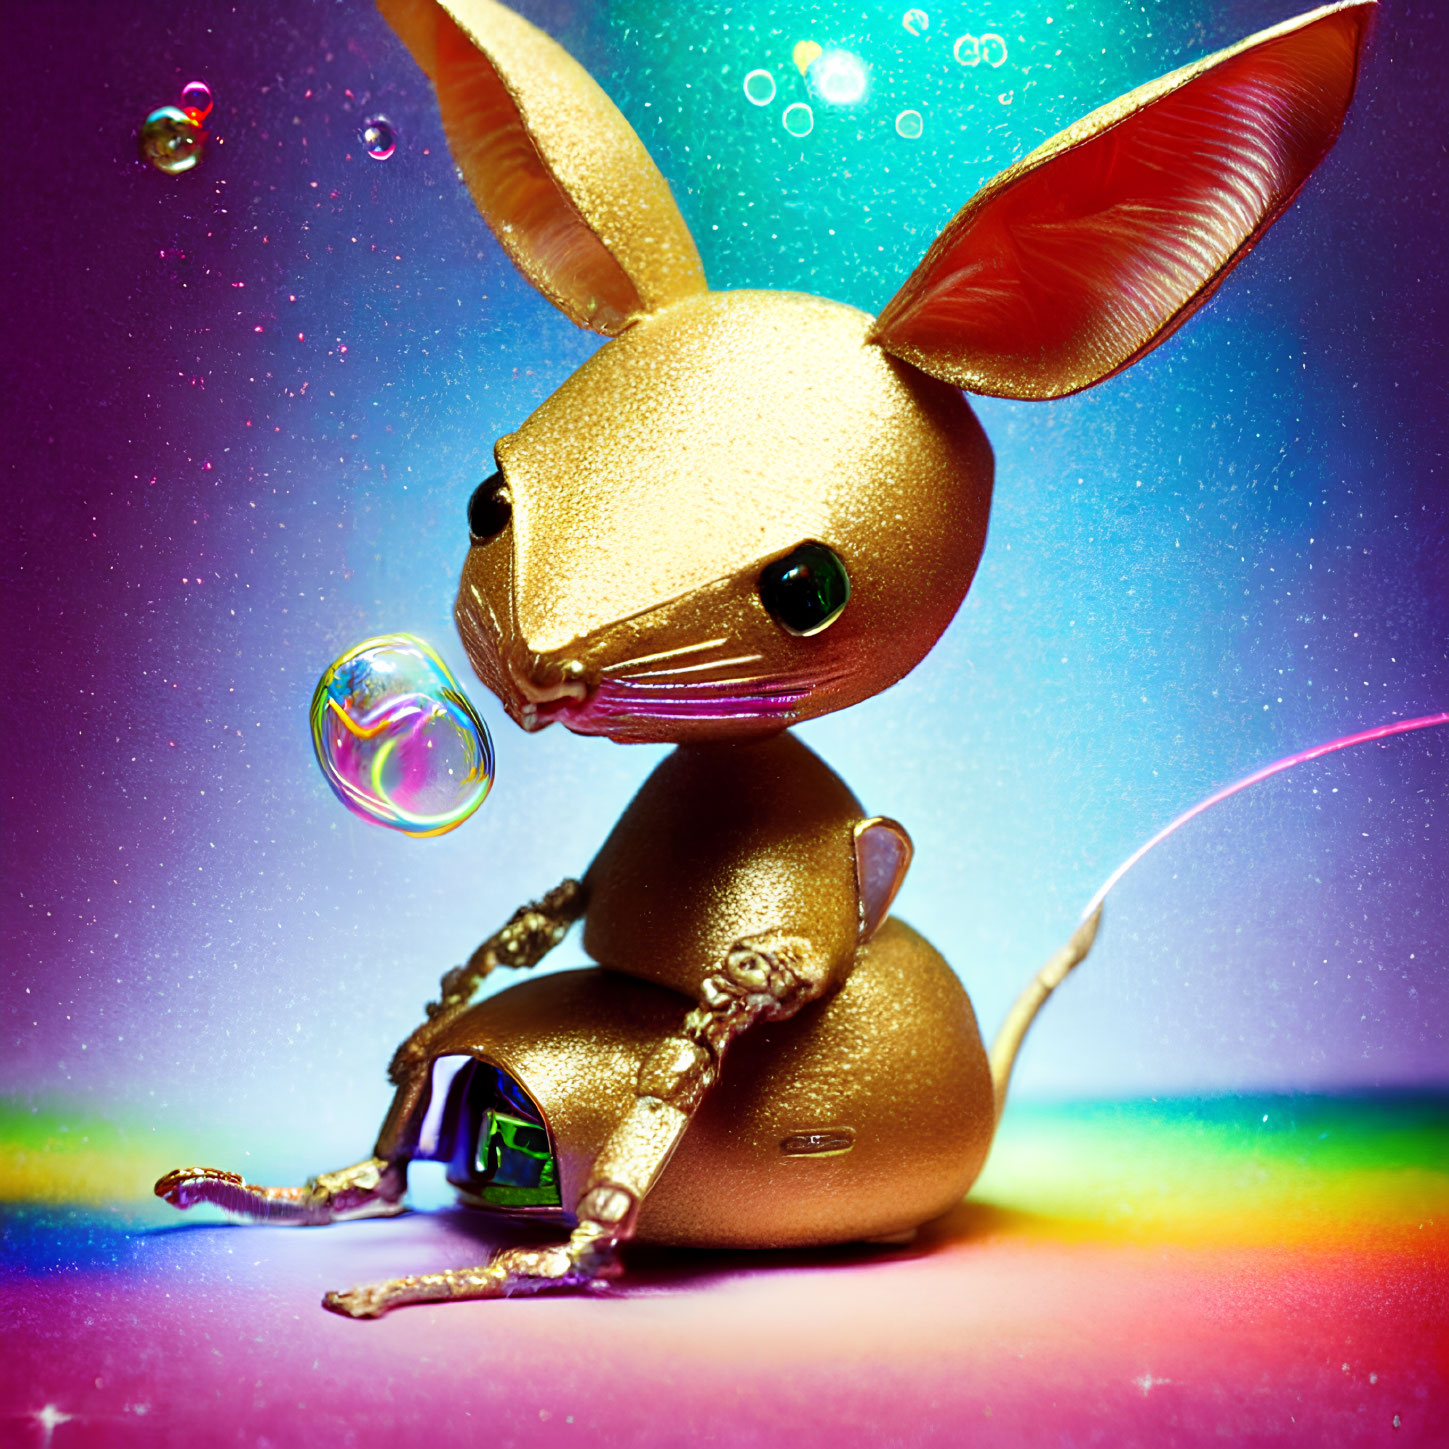 Golden Metallic Mouse Sculpture with Black Eyes on Colorful Bokeh Background